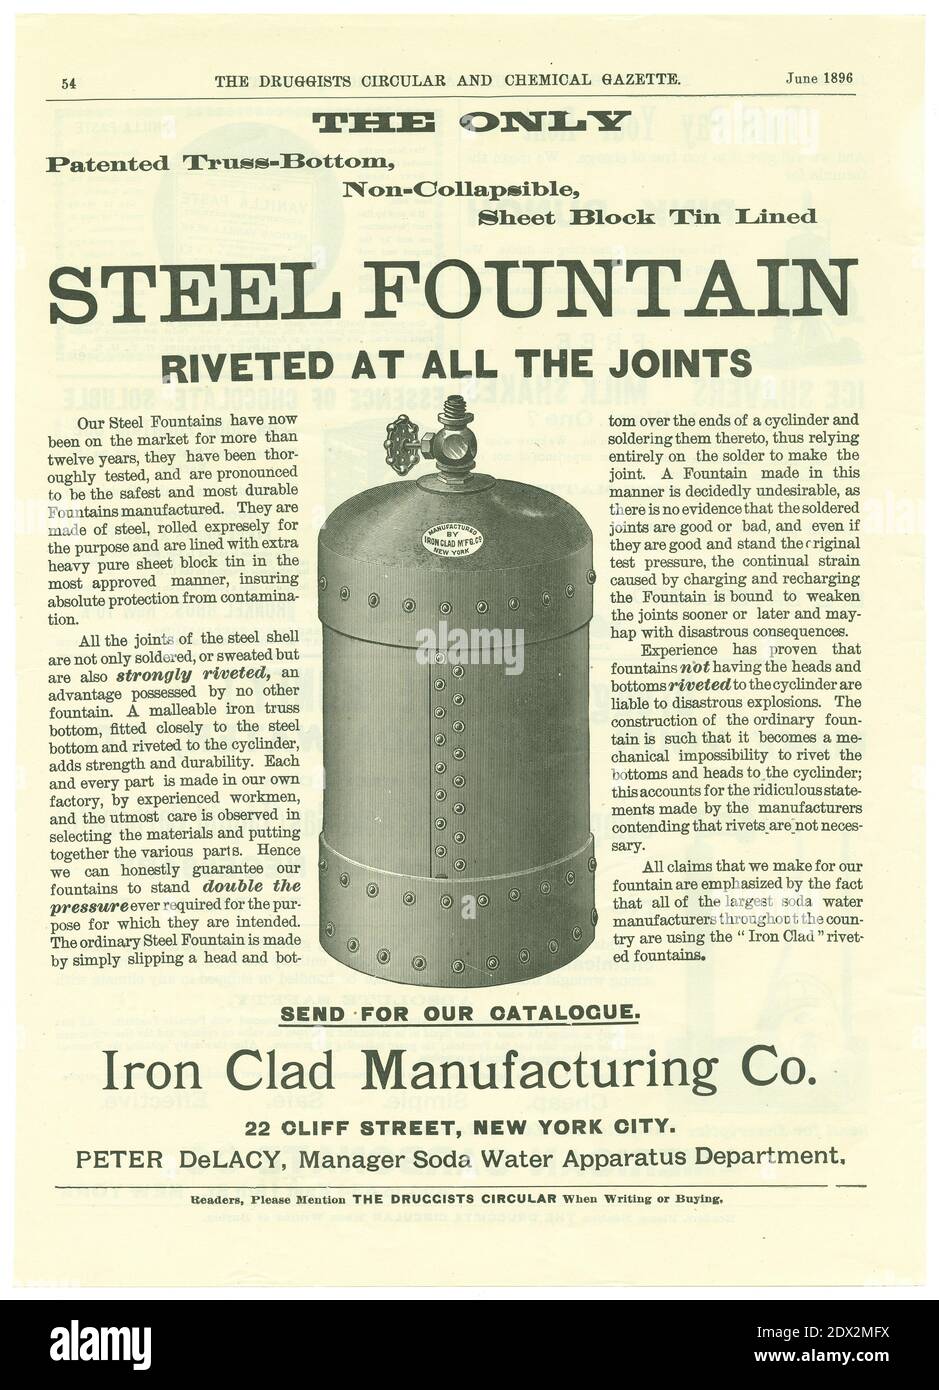 Antique June 1896 advertisement by Iron Clad Manufacturing Co. “Steel Fountains” in The Druggists Circular and Chemical Gazette. The text discusses the superior, riveted construction and warns against inferior models that are “liable to disastrous explosions.” Nellie Bly, American journalist, was head of the company after 1900. SOURCE: ORIGINAL ADVERTISEMENT Stock Photo